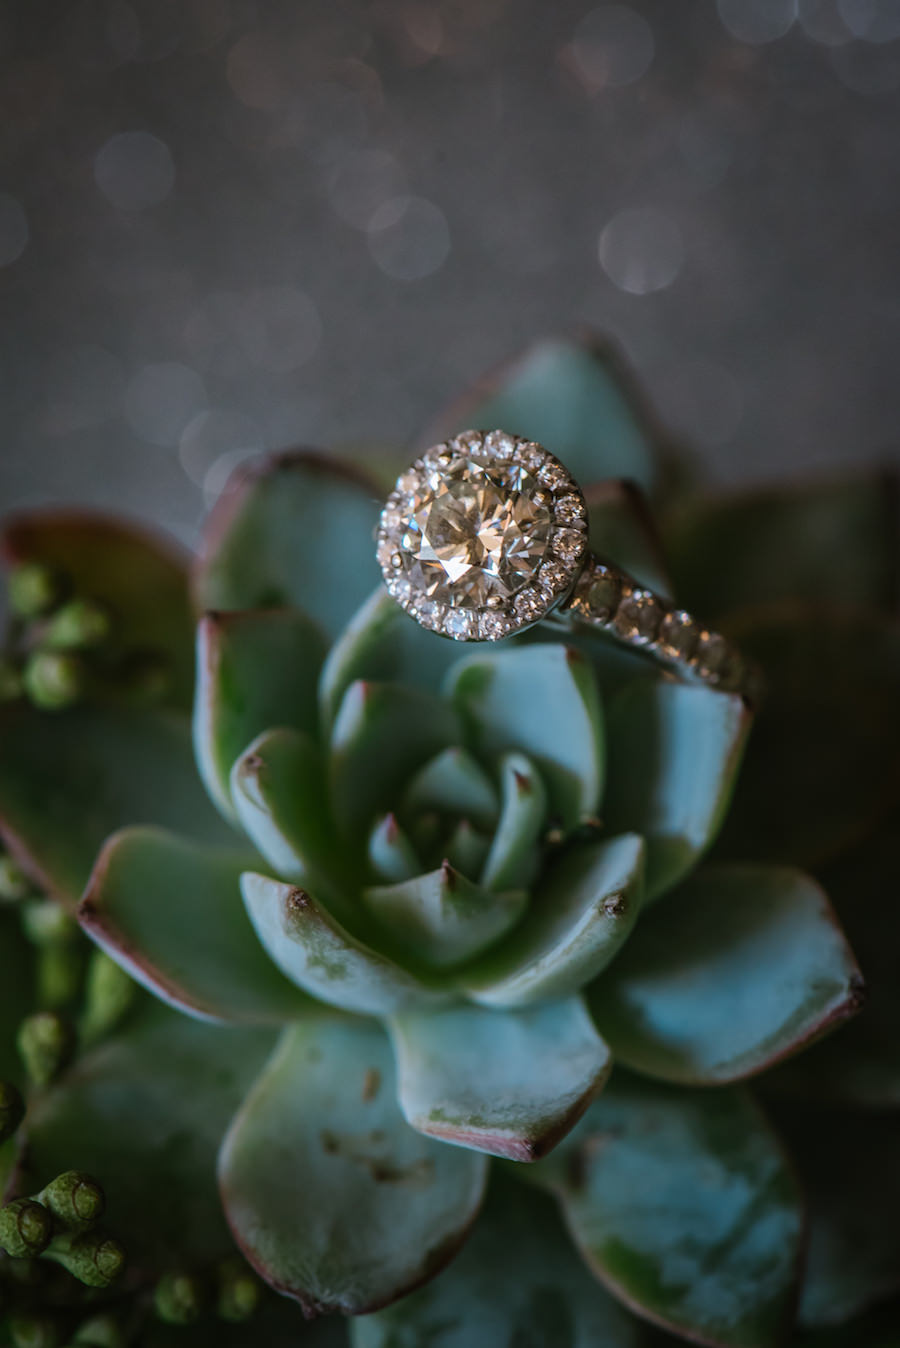 Brilliant Cut Engagement Ring with Halo on Succulent Portrait | Round Shaped Diamond Ring With Halo